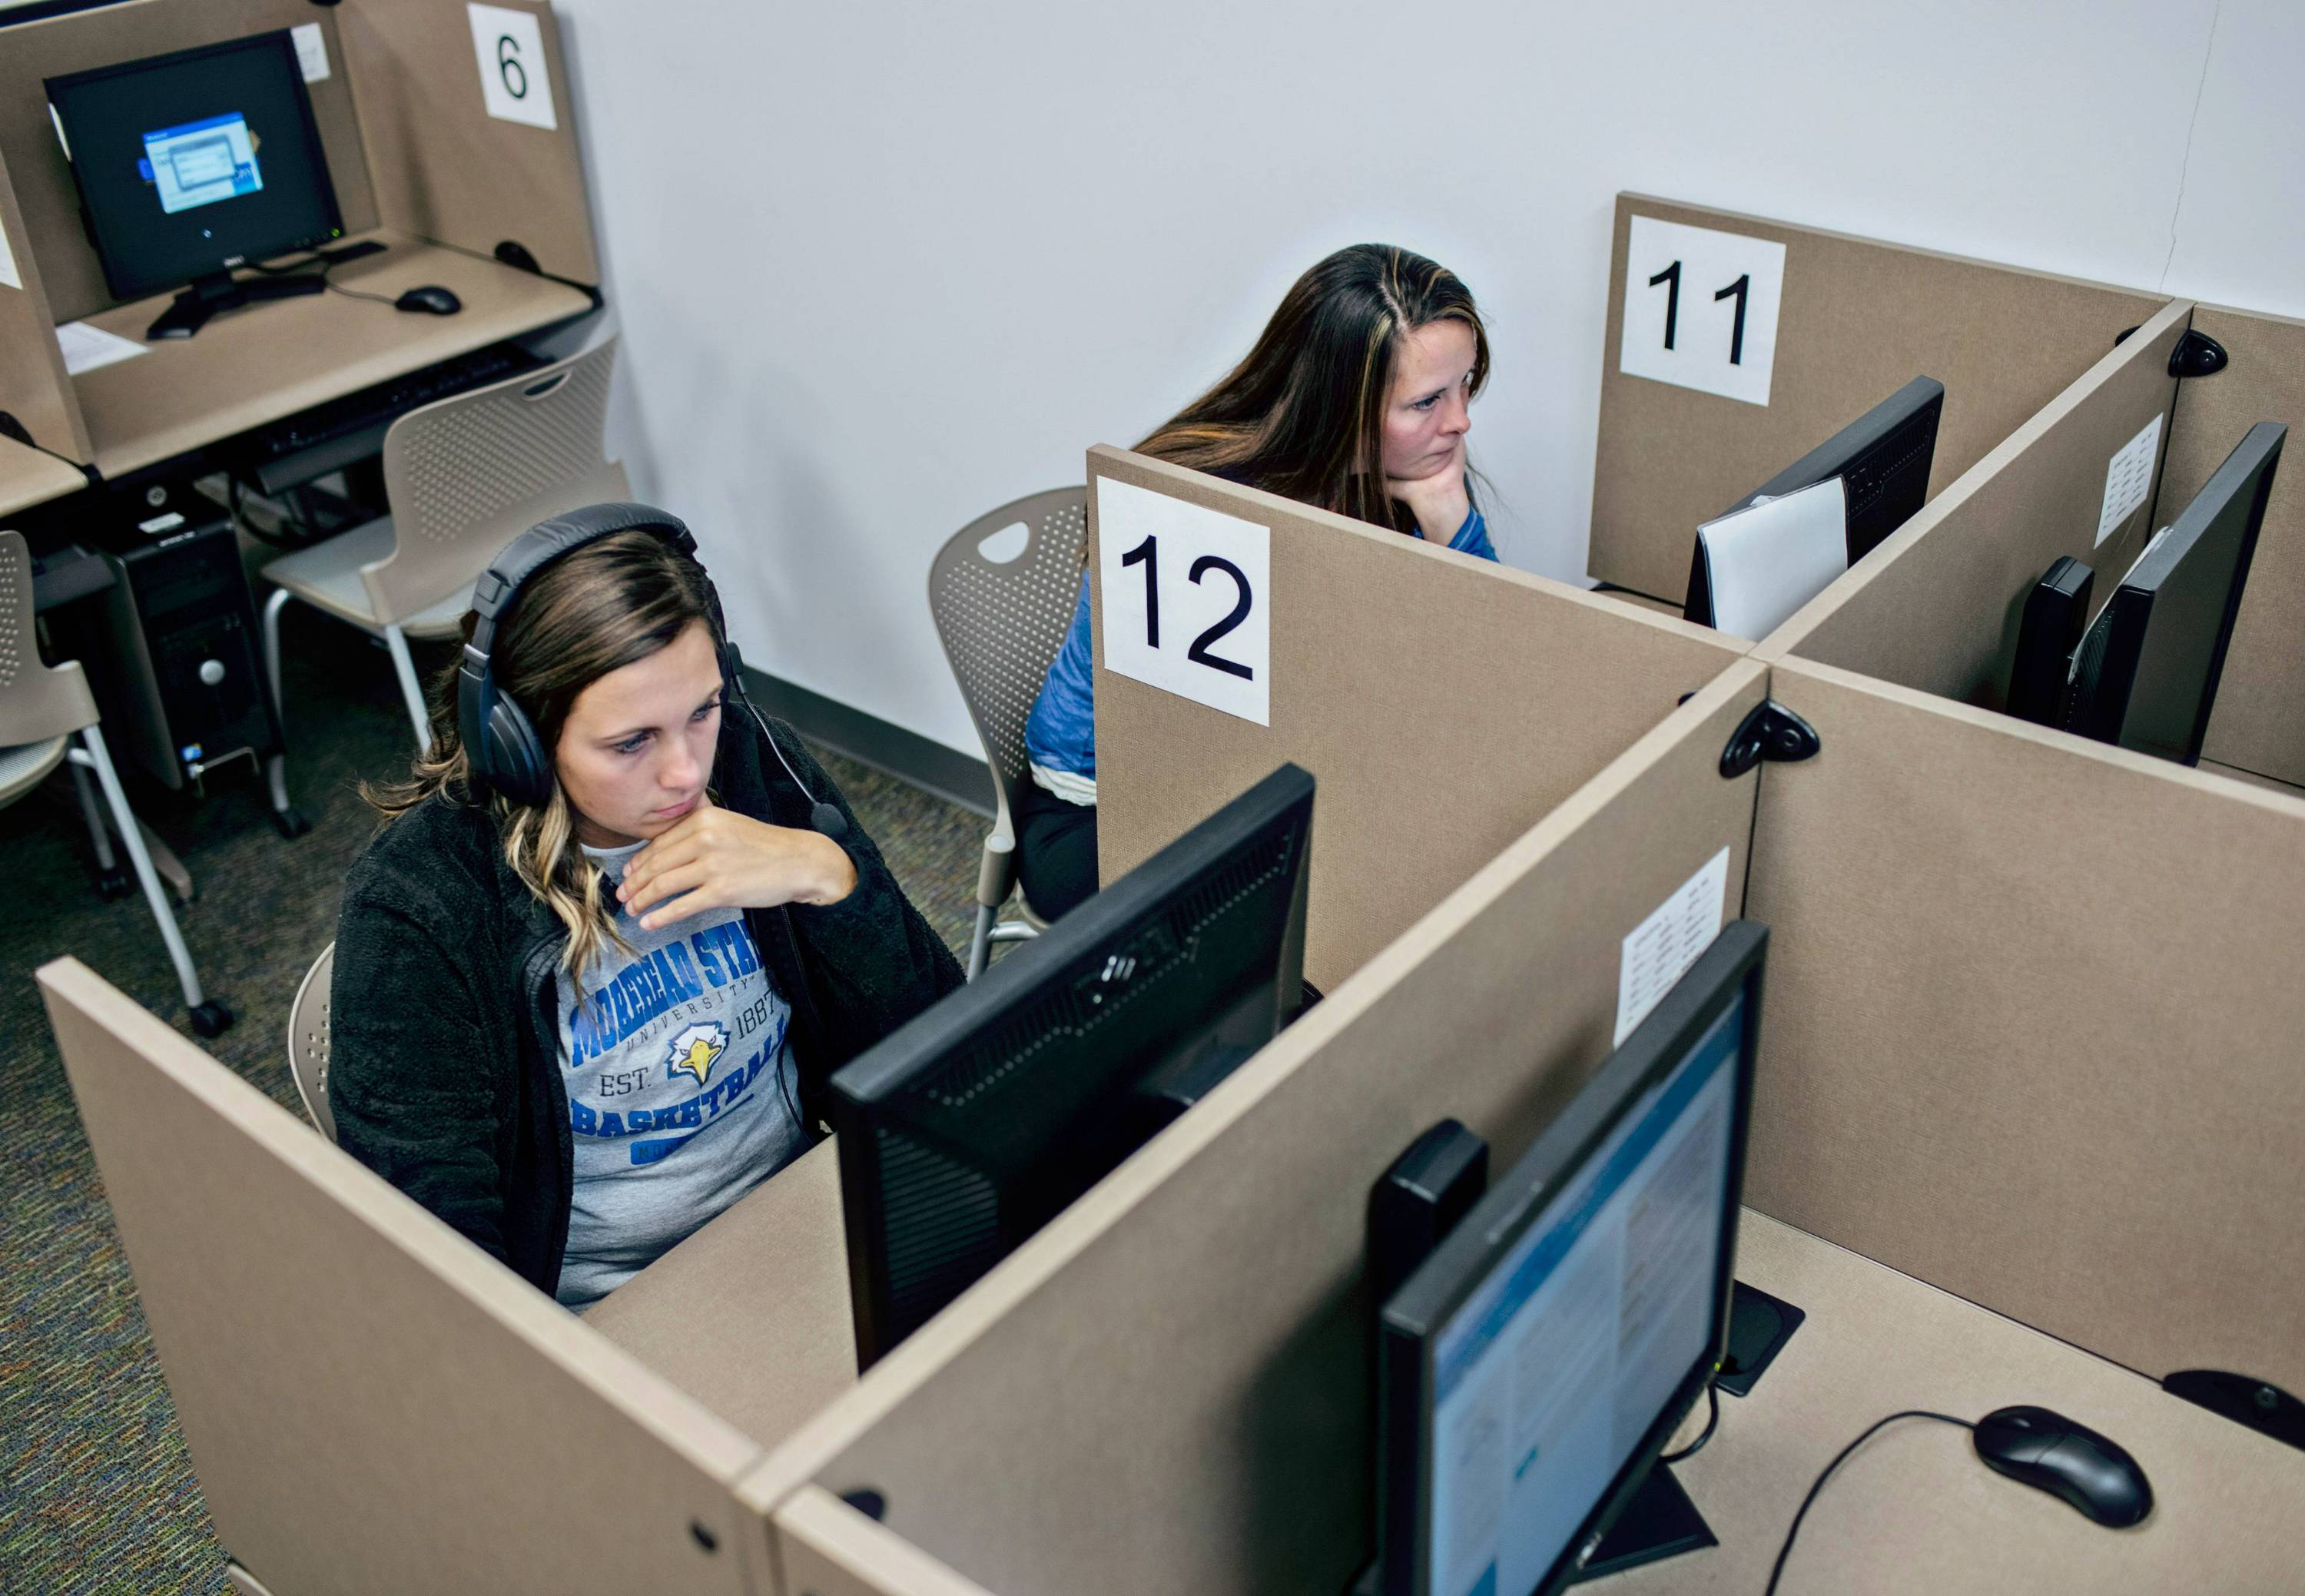 2 female students taking tests on the computer